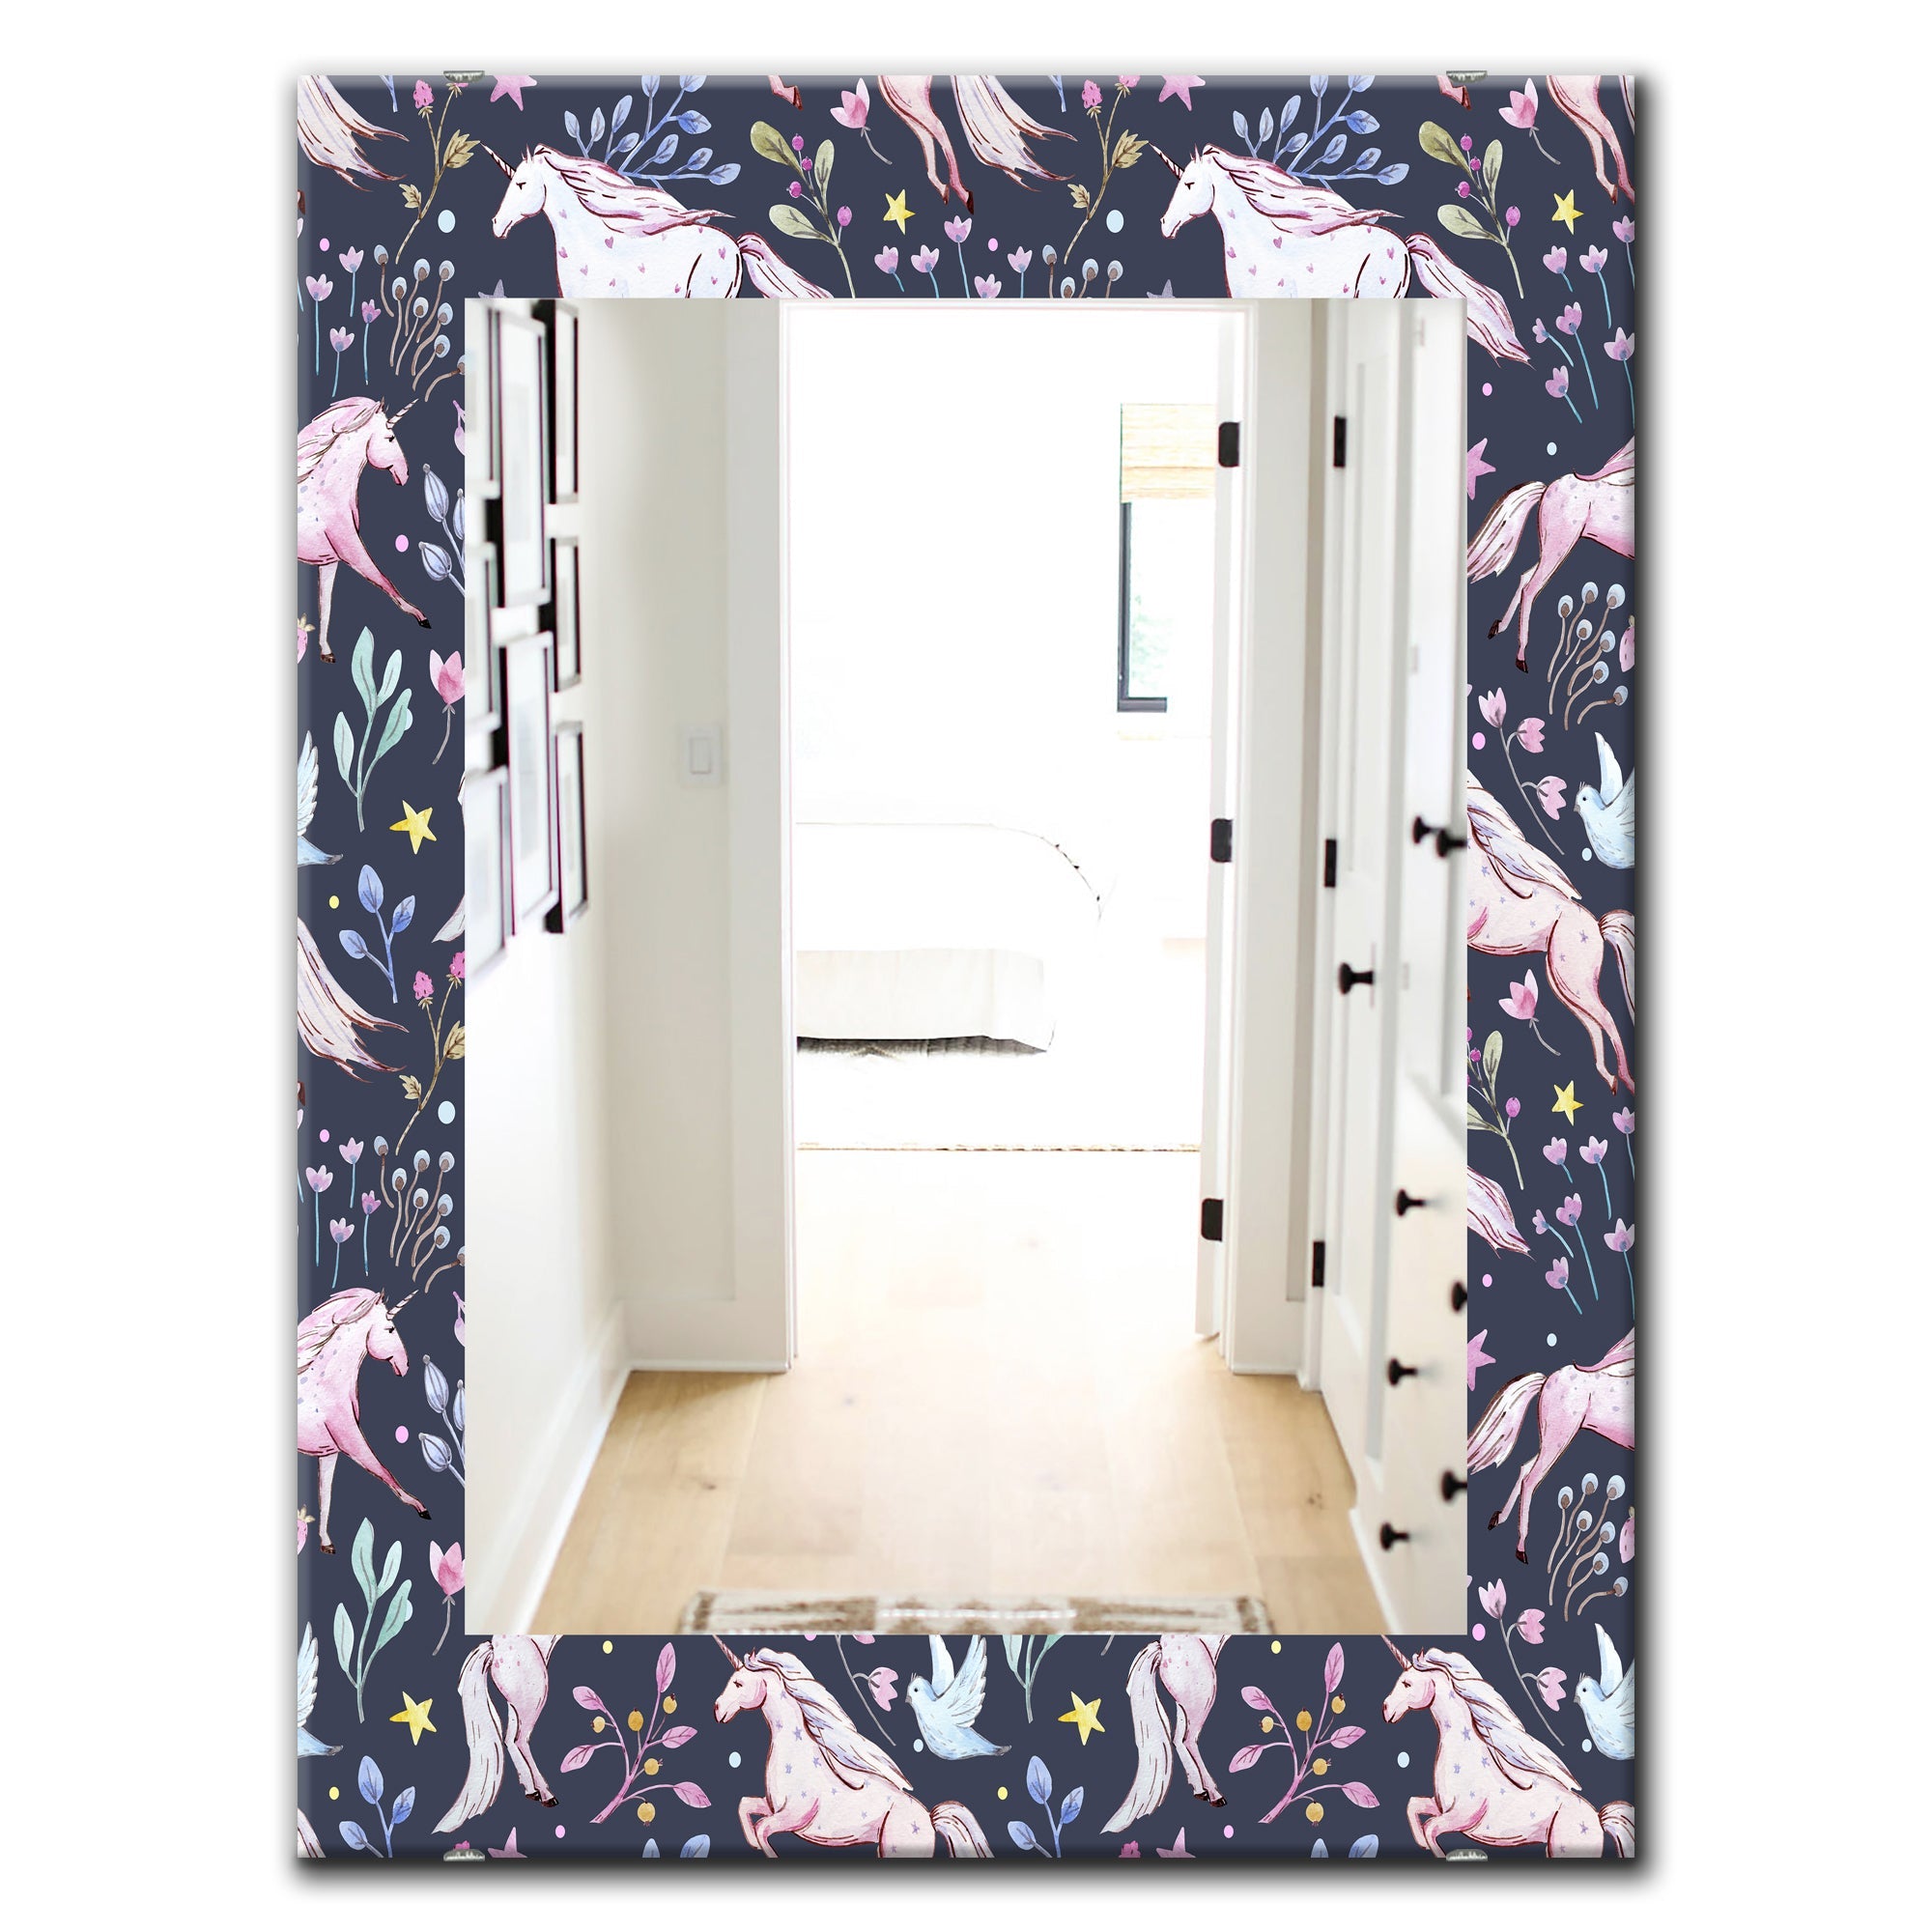 Watercolor Unicorn Pattern' Modern Mirror - Oval or Round Wall Mirror